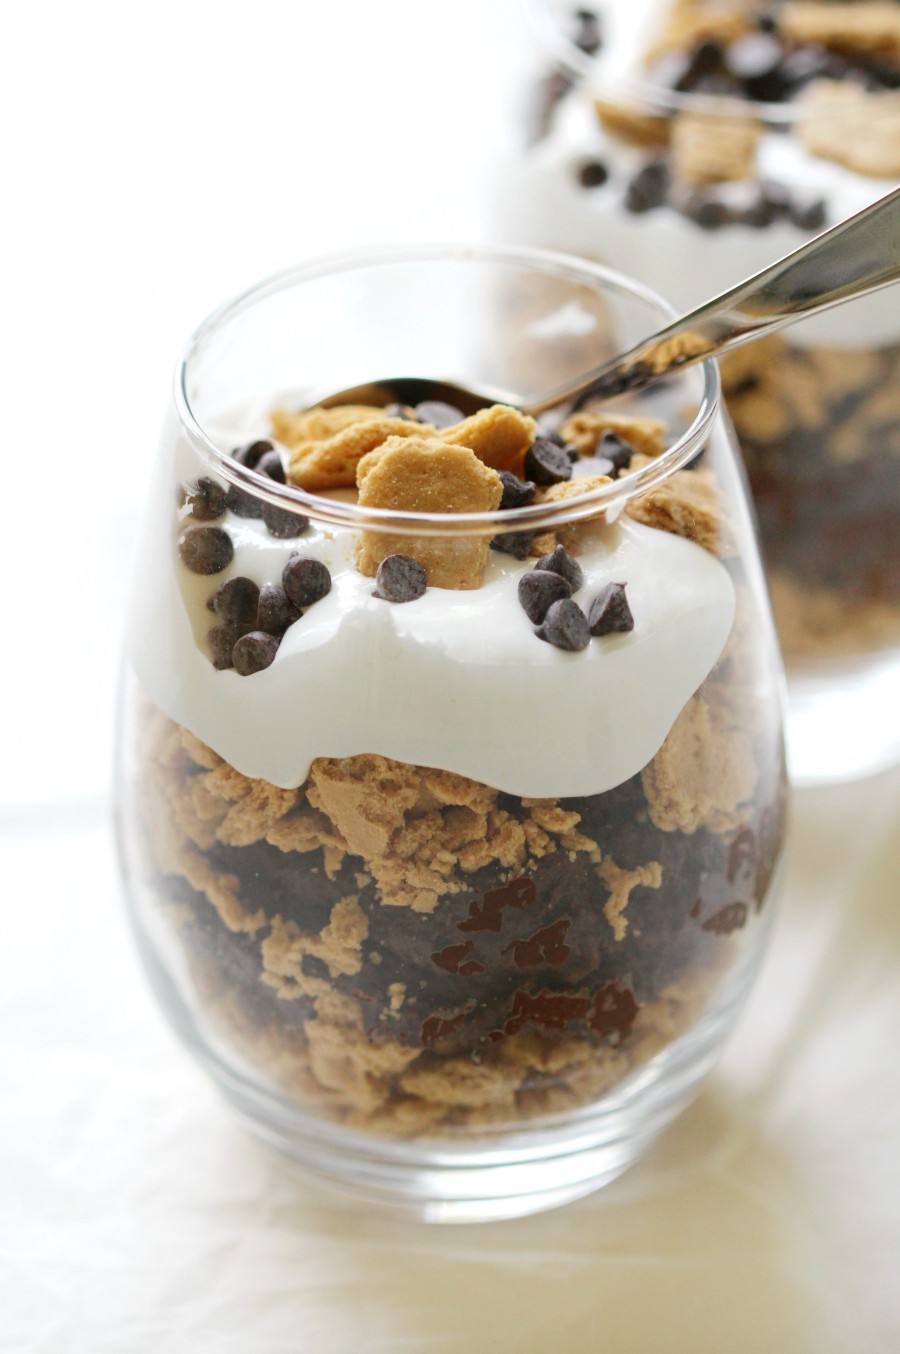 No-Bake Gluten-Free S'mores Parfait (Vegan, Allergy-Free) | Strength and Sunshine @RebeccaGF666 Easy, healthy, and delicious! A No-Bake Gluten-Free S'mores Parfait that's vegan, top 8 allergy-free, and uses homemade ingredients without the junk! A perfect summer dessert recipe the kids and adults will love (it's even secretly protein-packed)!